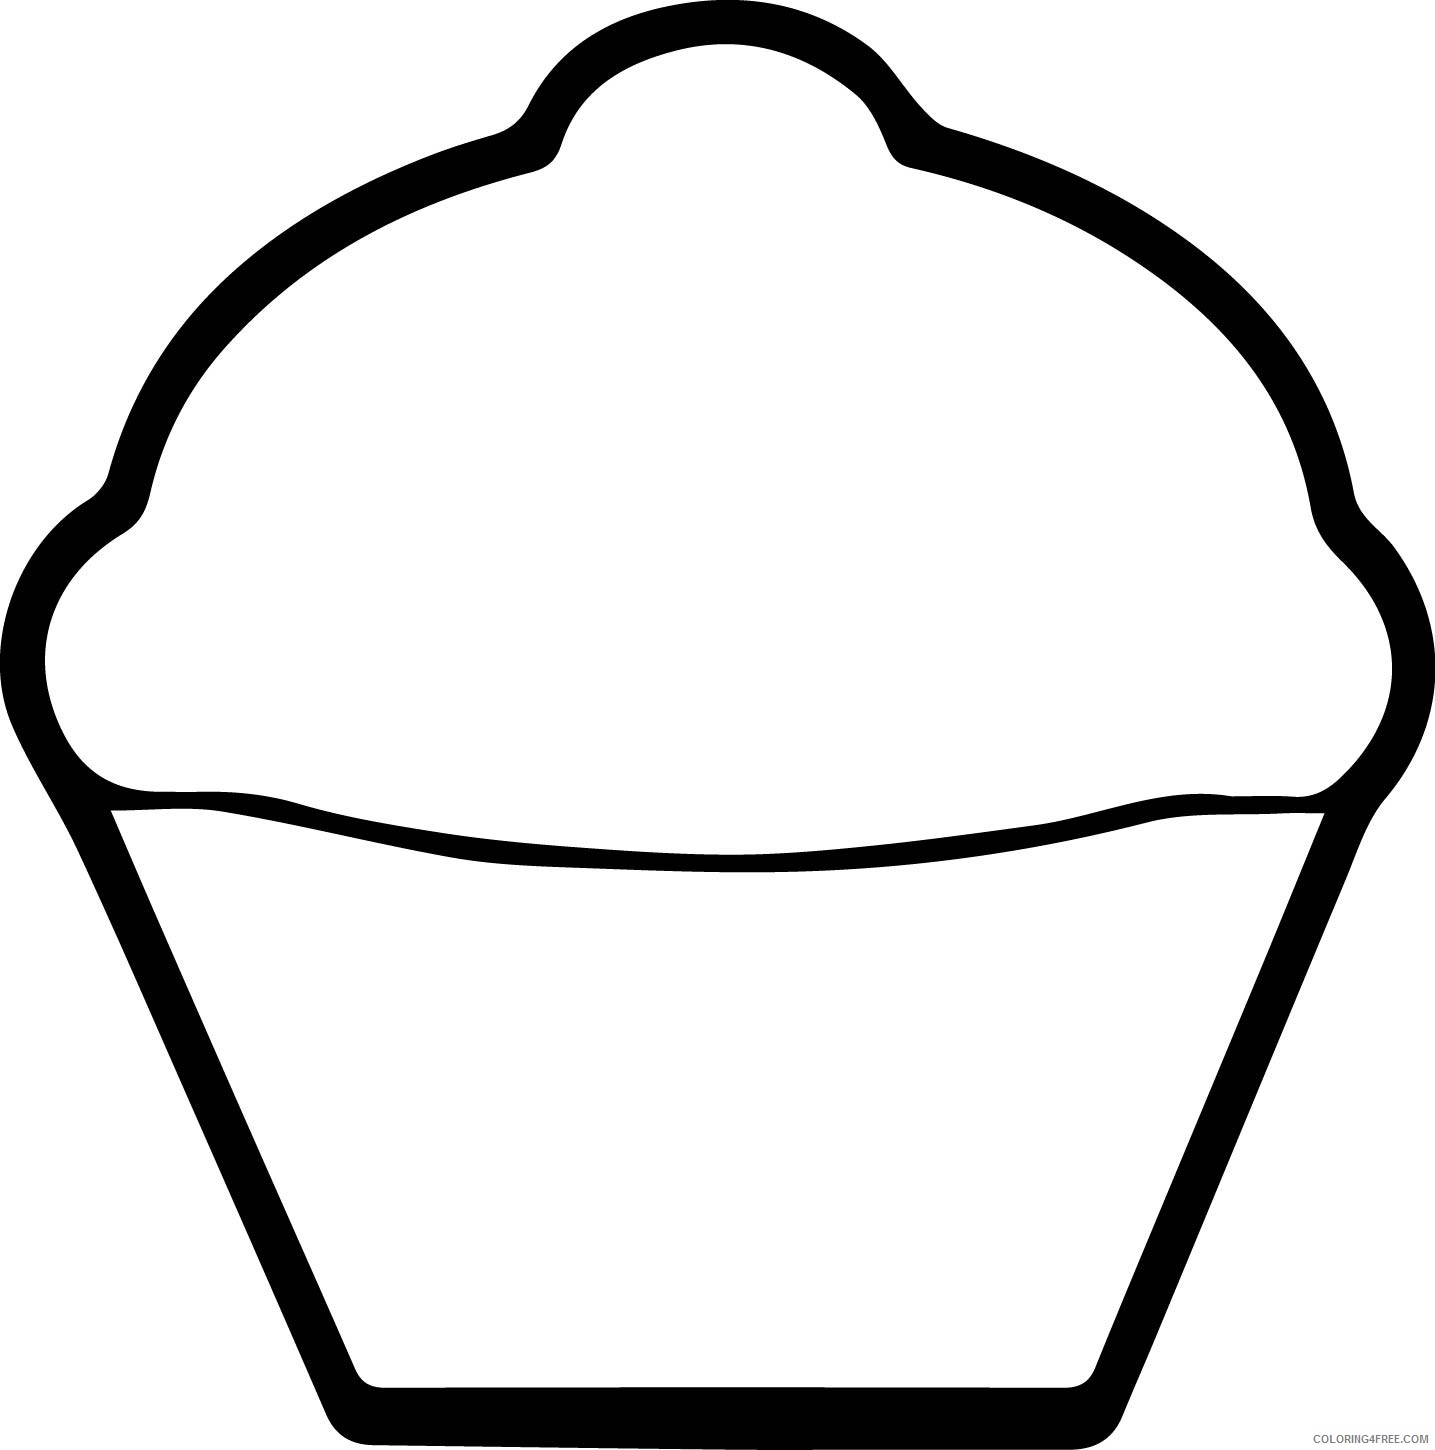 cupcake-coloring-pages-for-kids-cute-cupcake-coloring-pages-getcoloringpages-com